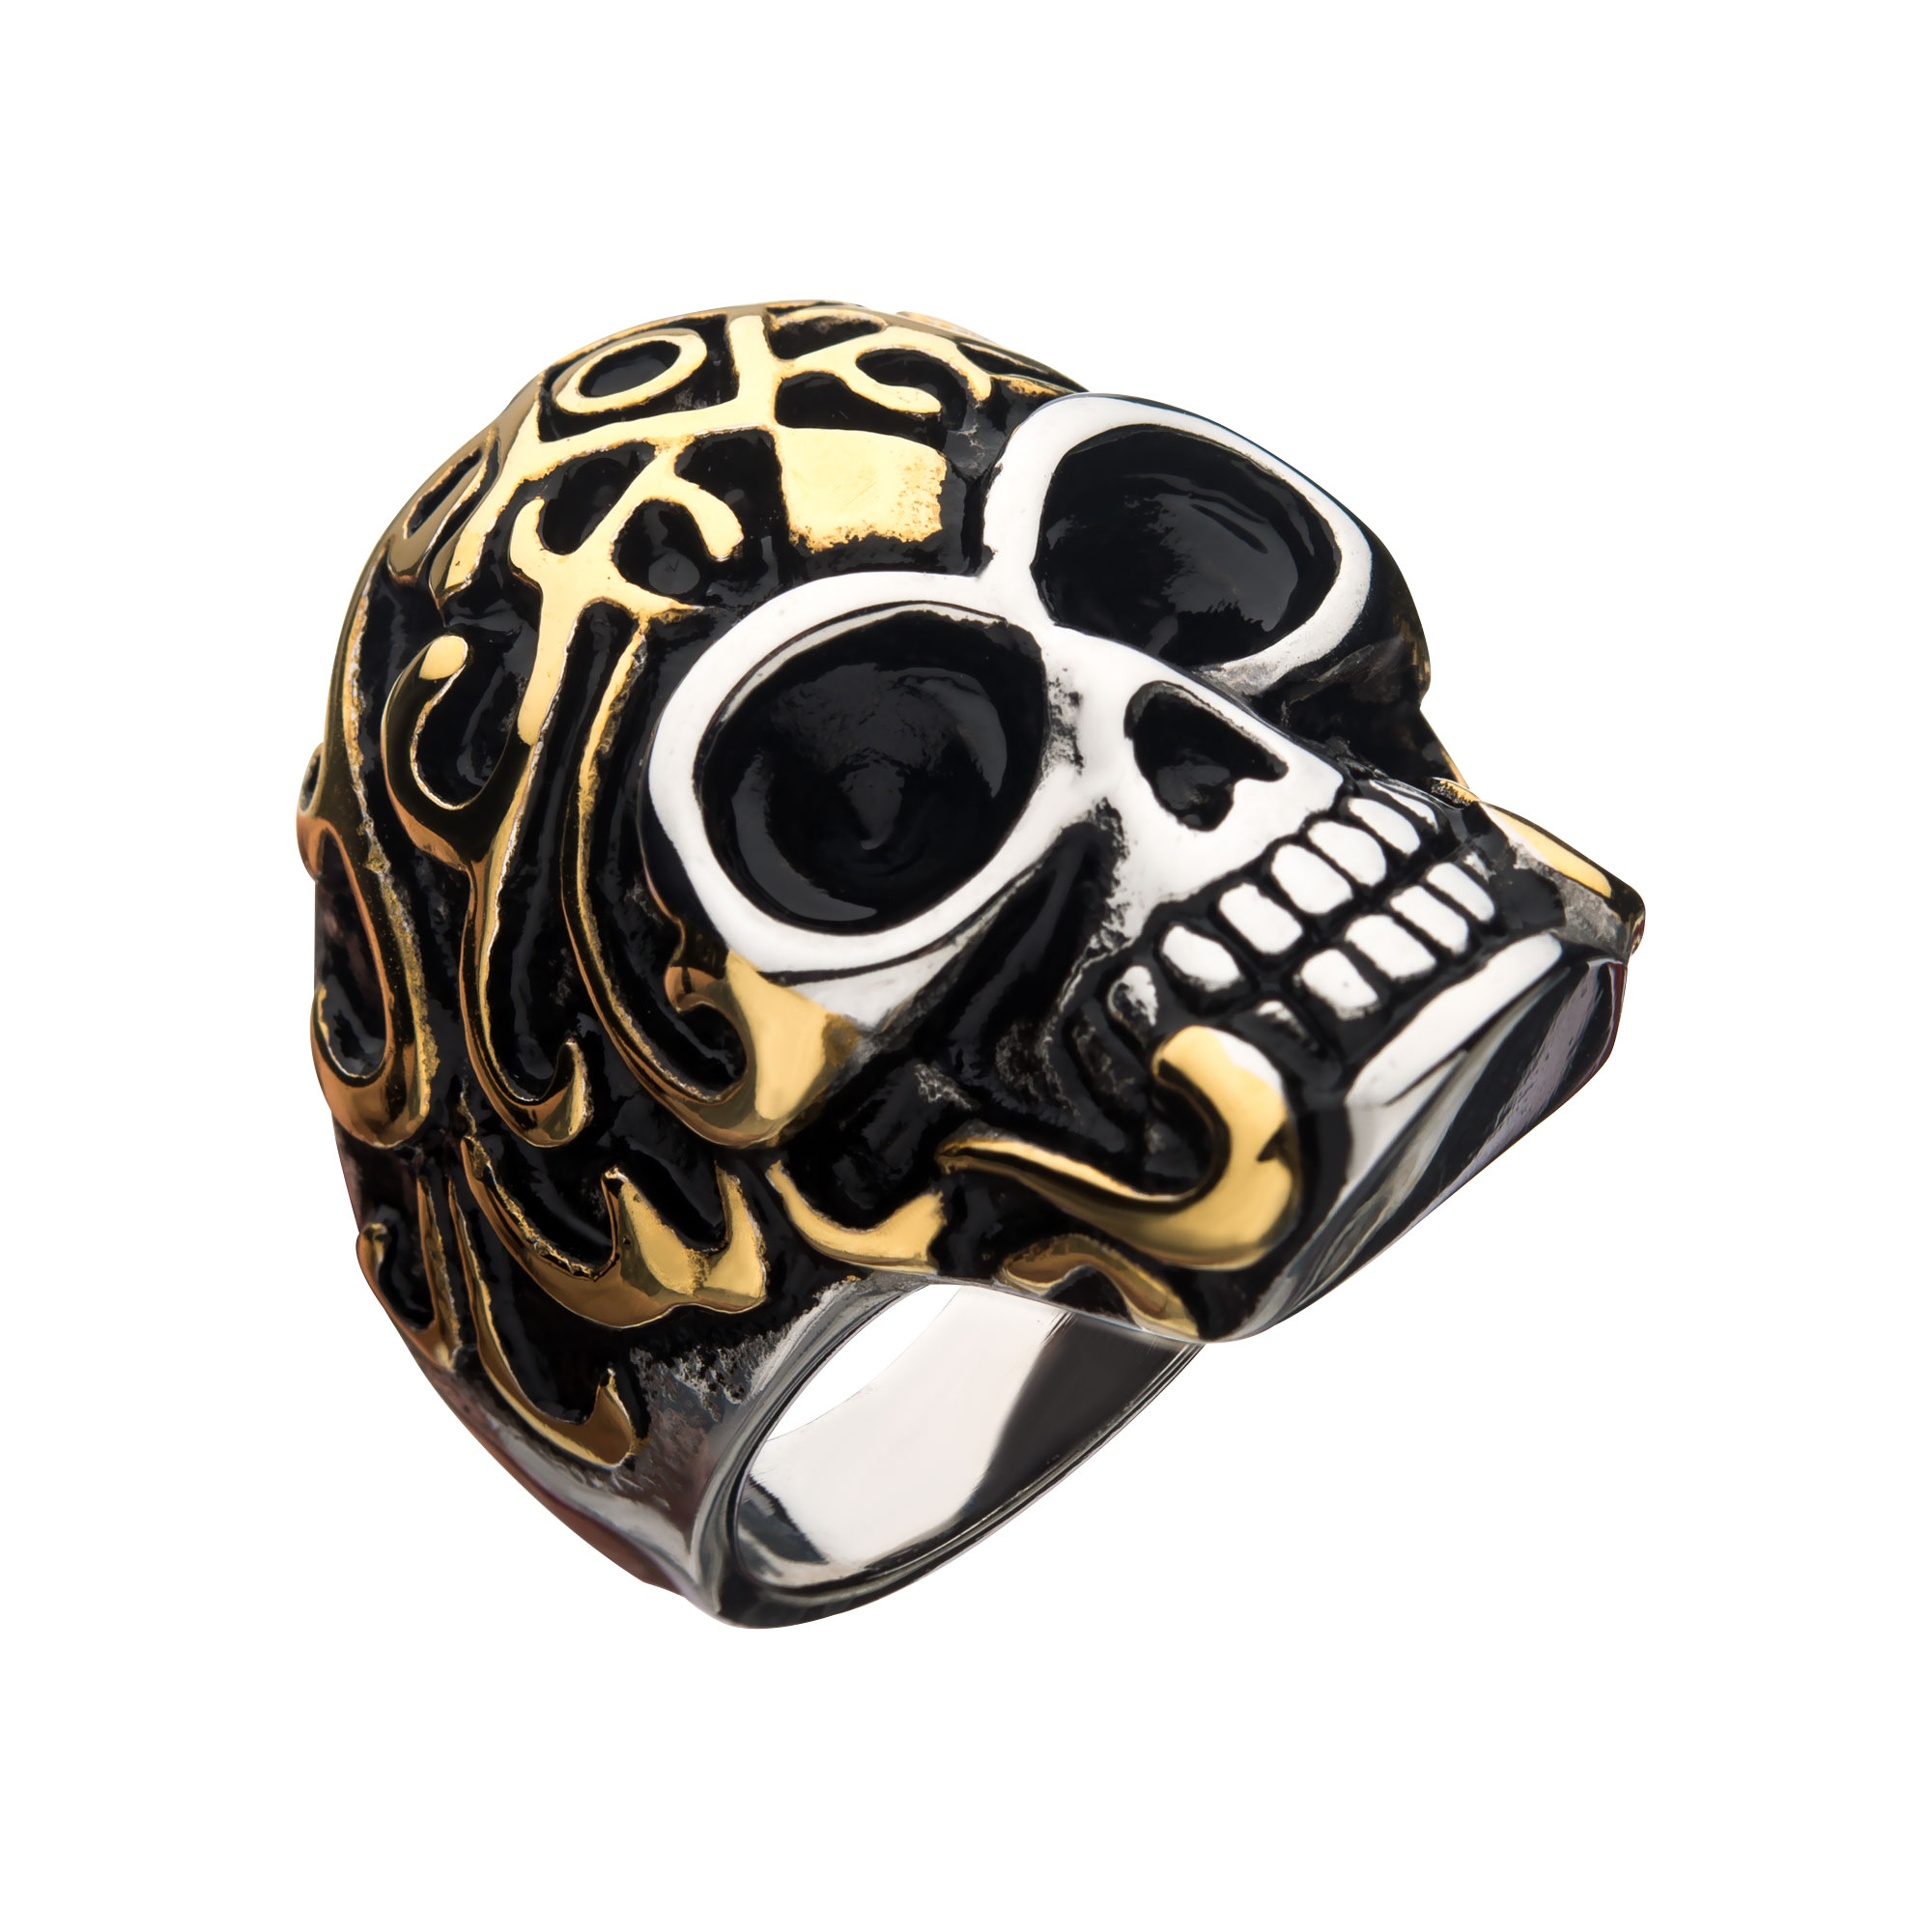 Oxidized Stainless Steel & Gold IP Skull Ring Lewis Jewelers, Inc. Ansonia, CT